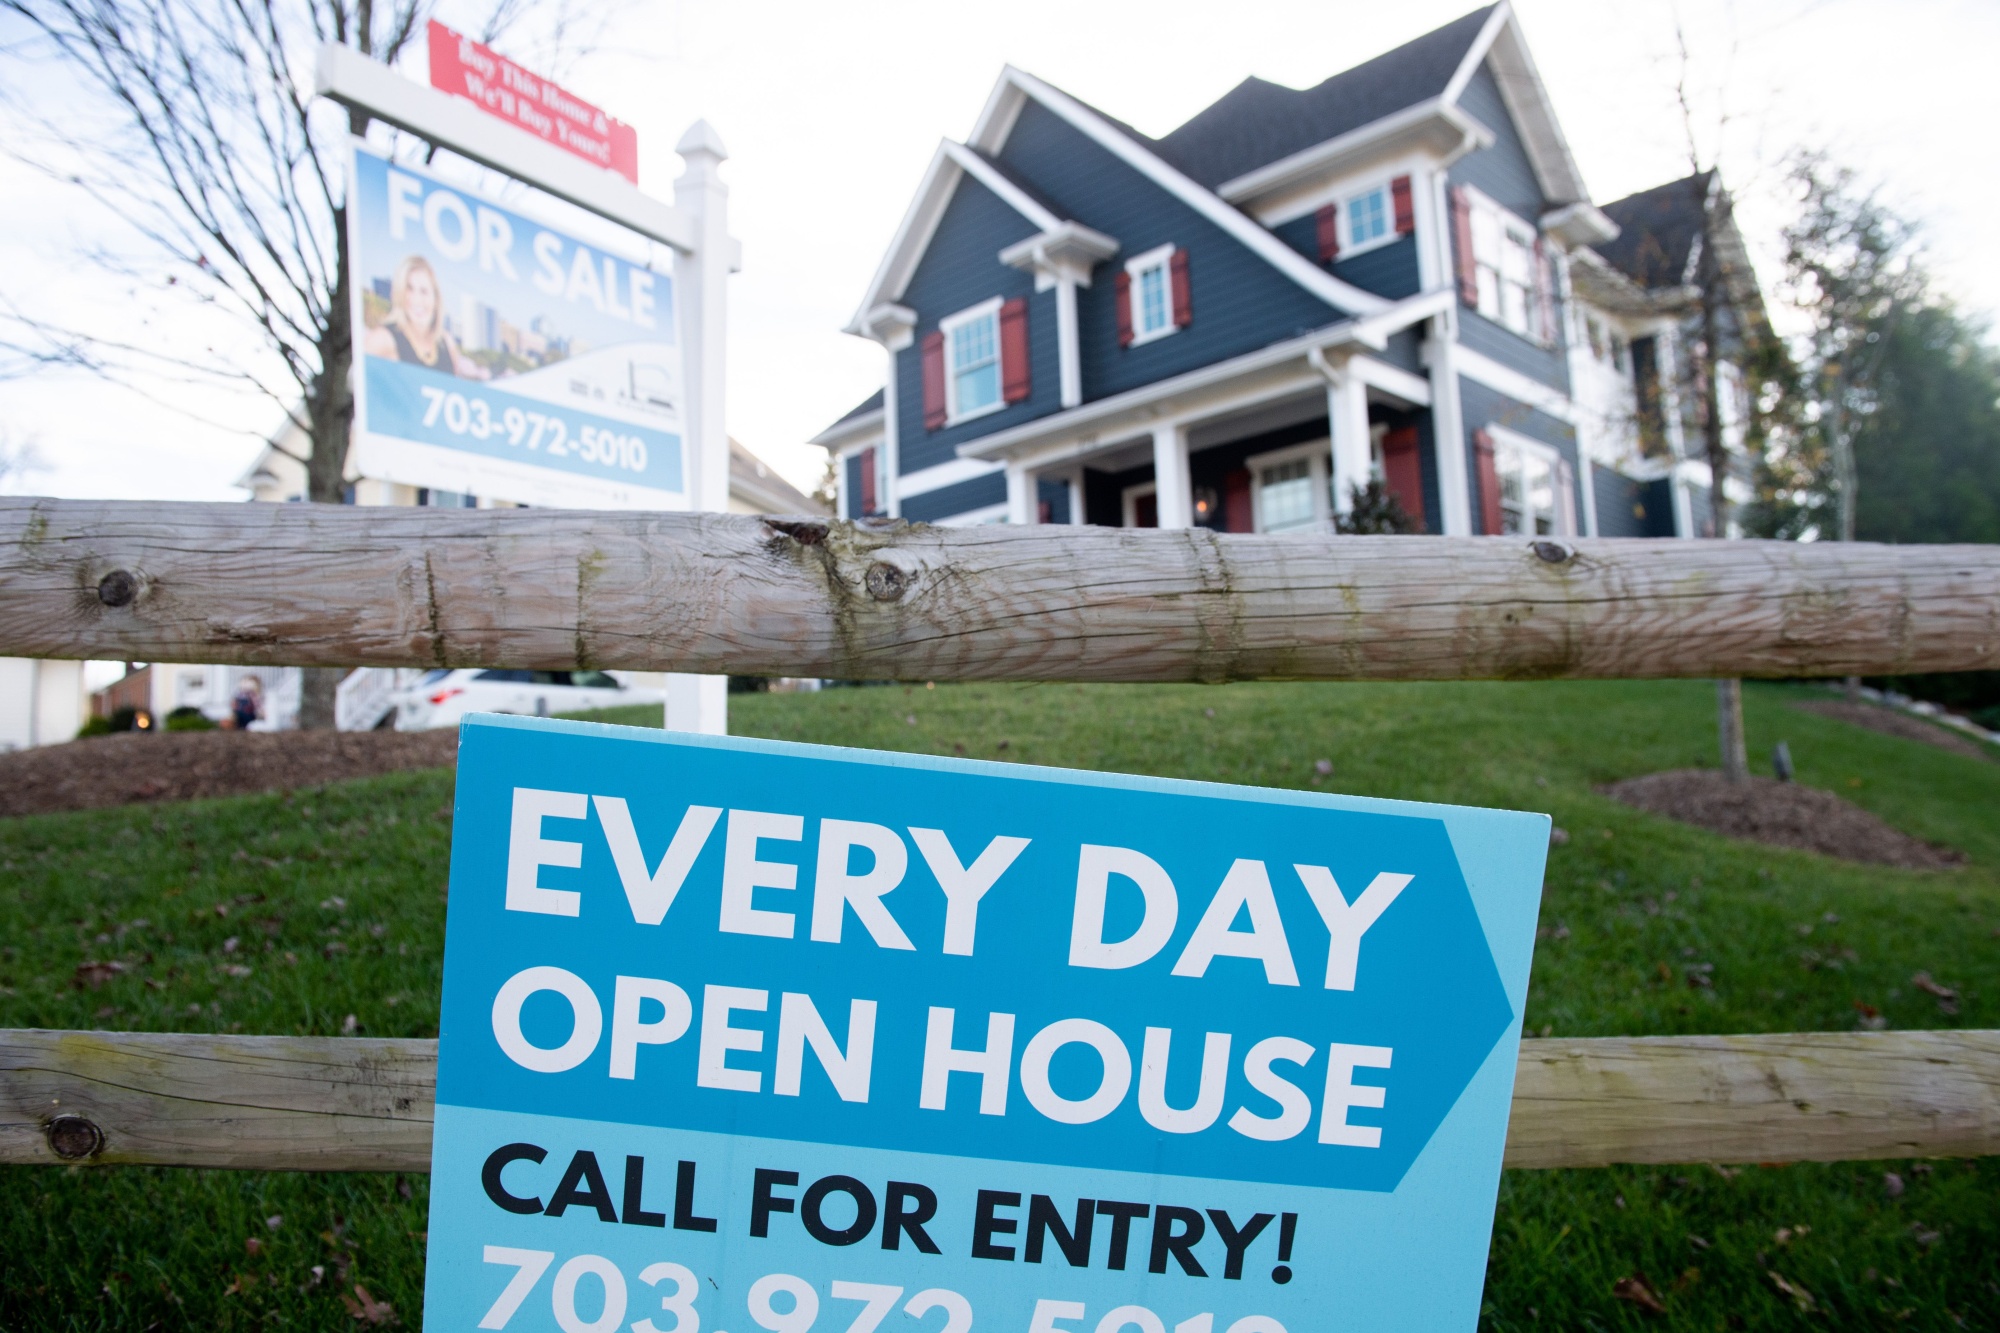 Skyrocketing Mortgage Rates: Why Thousands of U.S. Homeowners Could Face Doubled Payments Soon